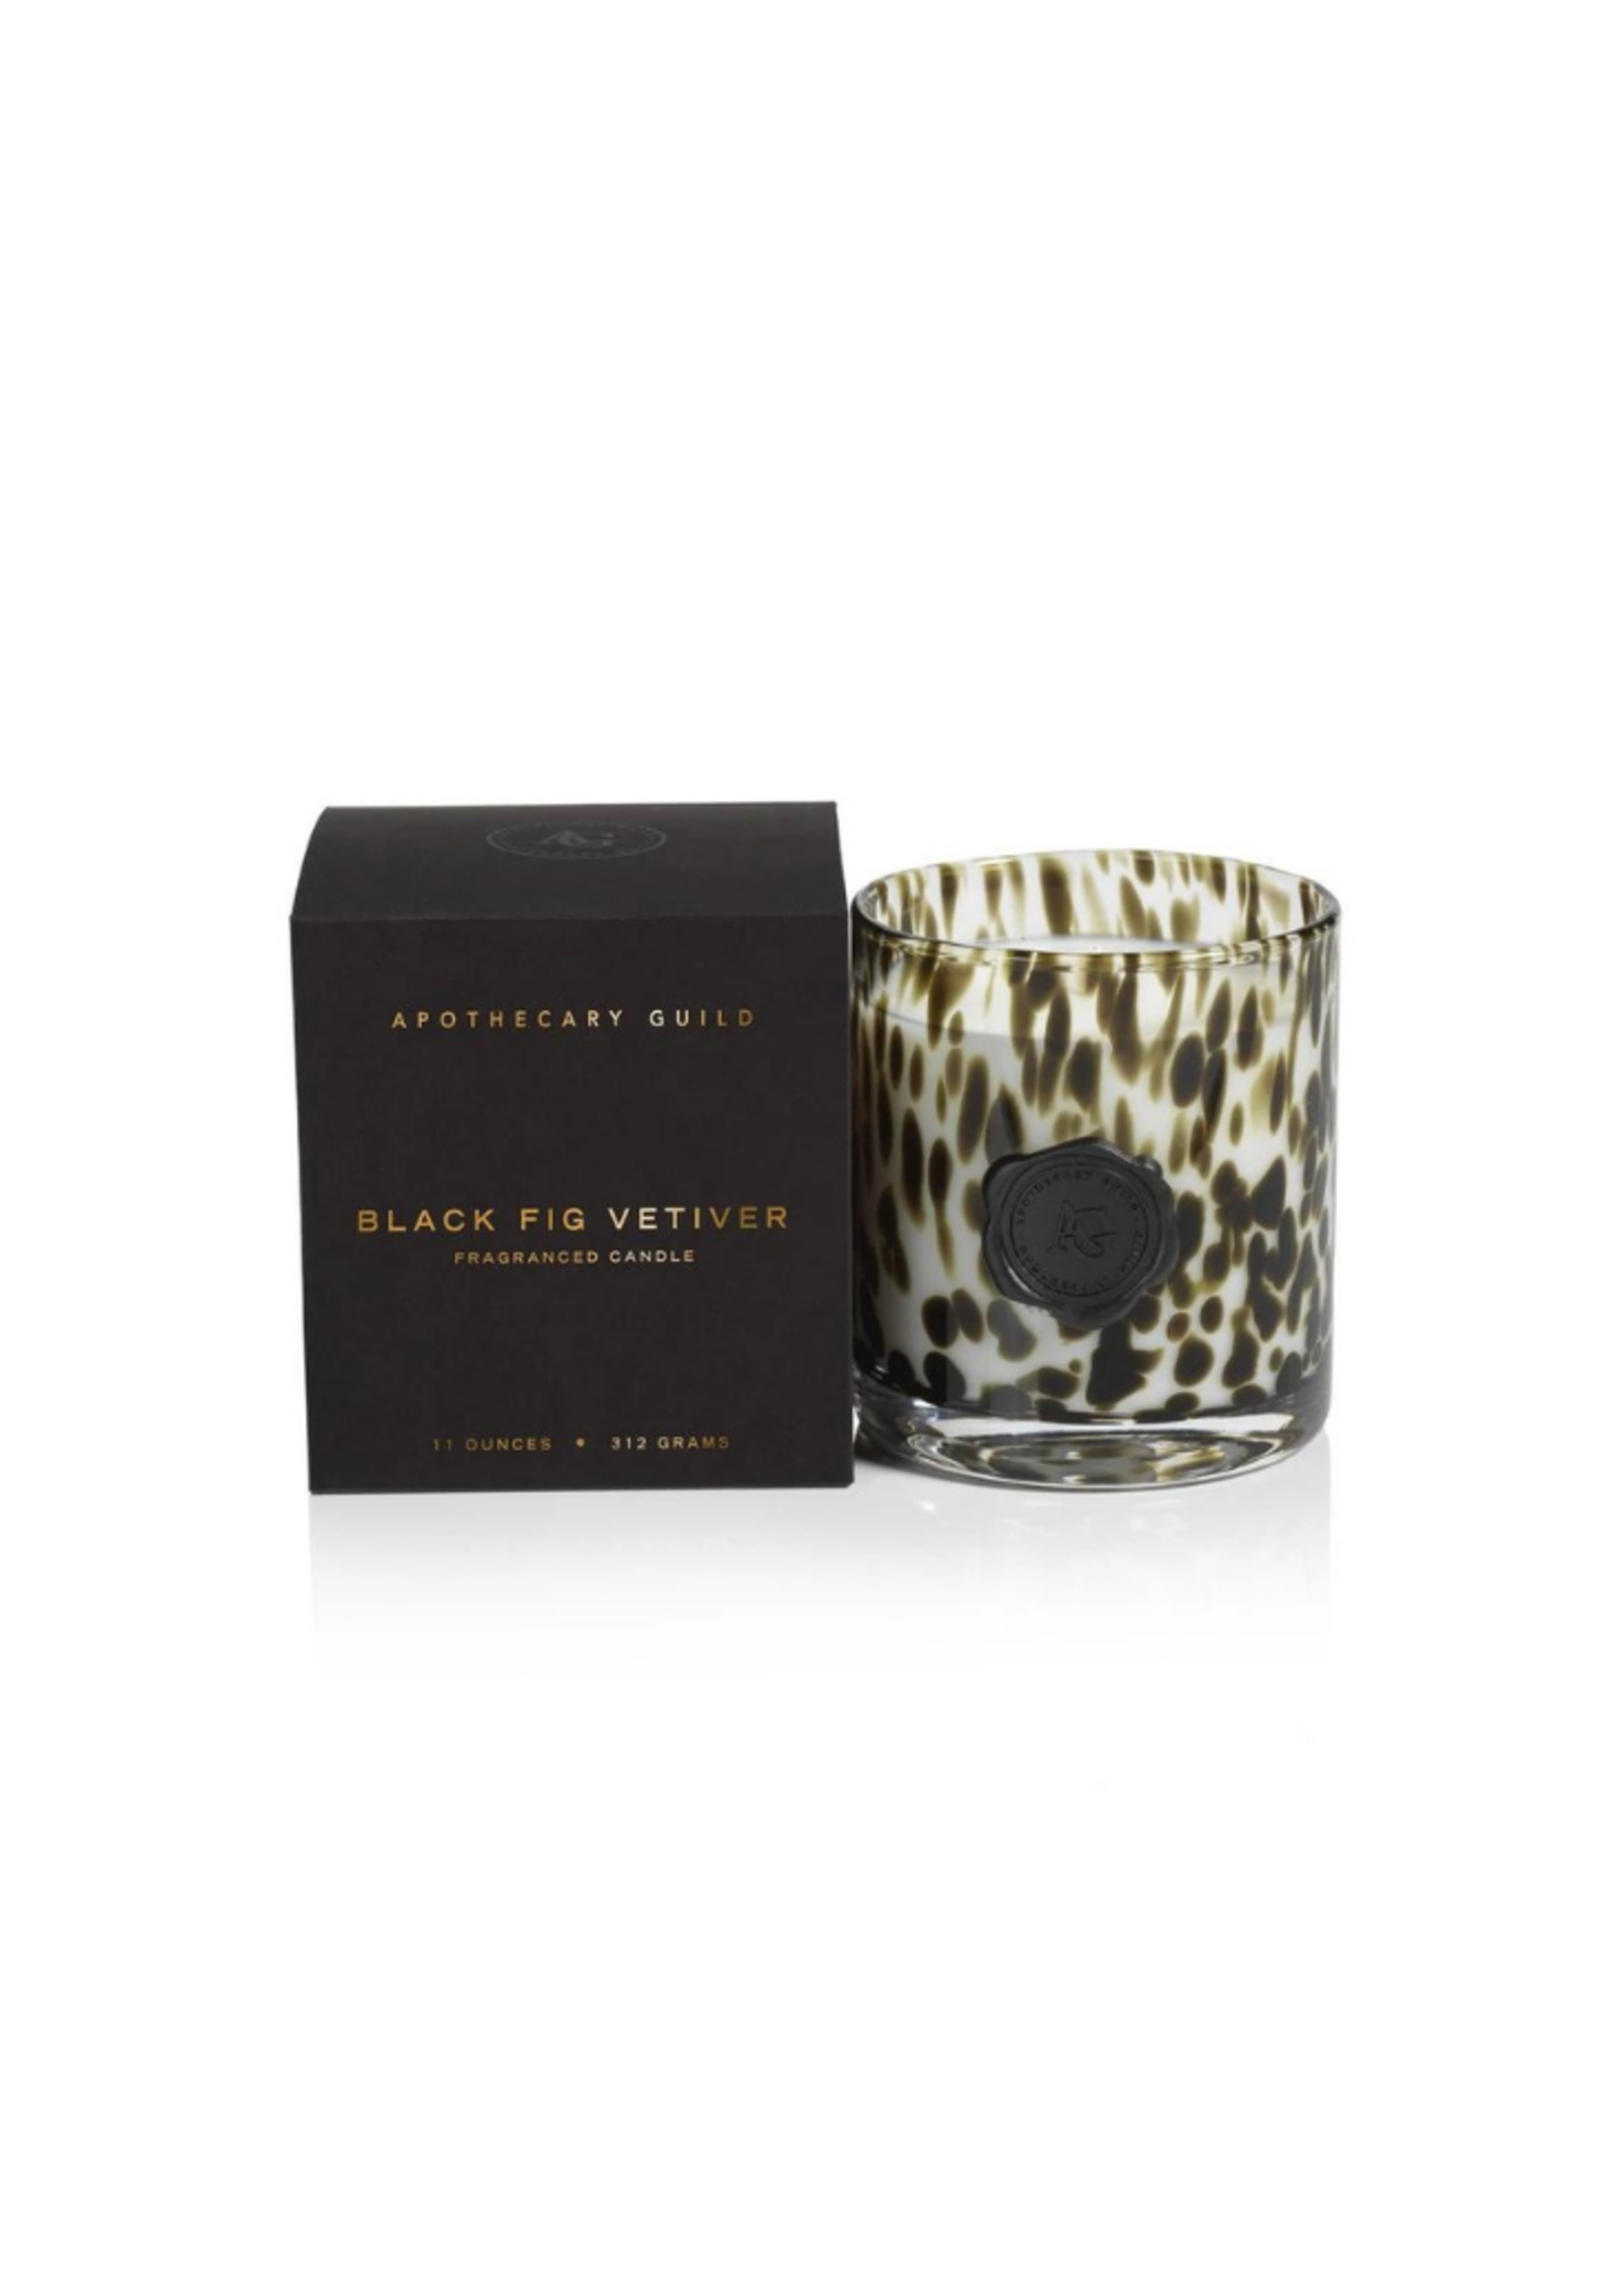 Opal Glass Candle Jar in Gift Box // Black Fig Vetiver